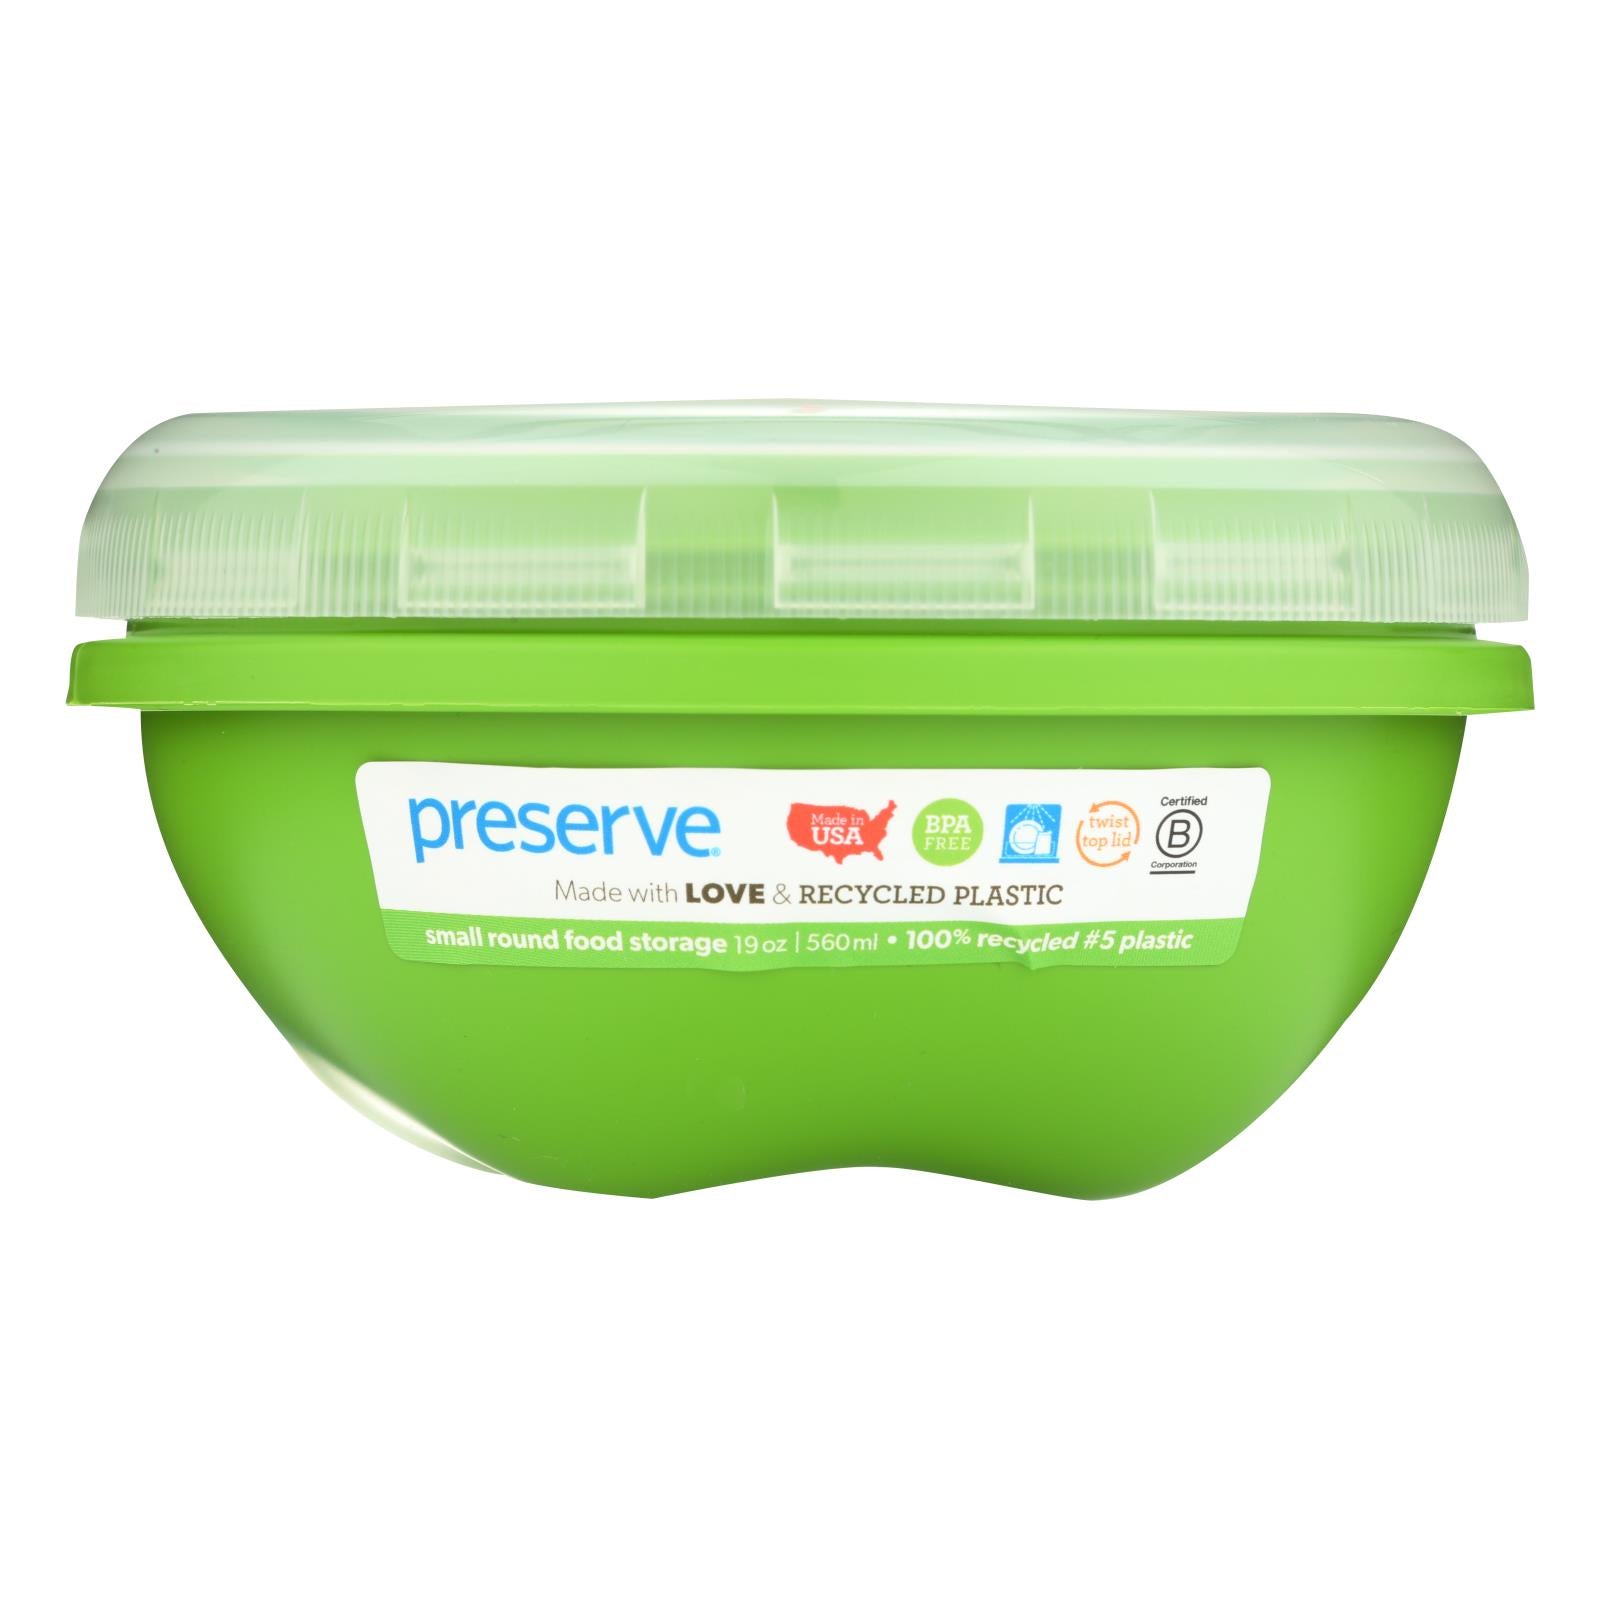 Preserve Small Round Food Storage Container - Green - 19 Oz - Whole Green Foods